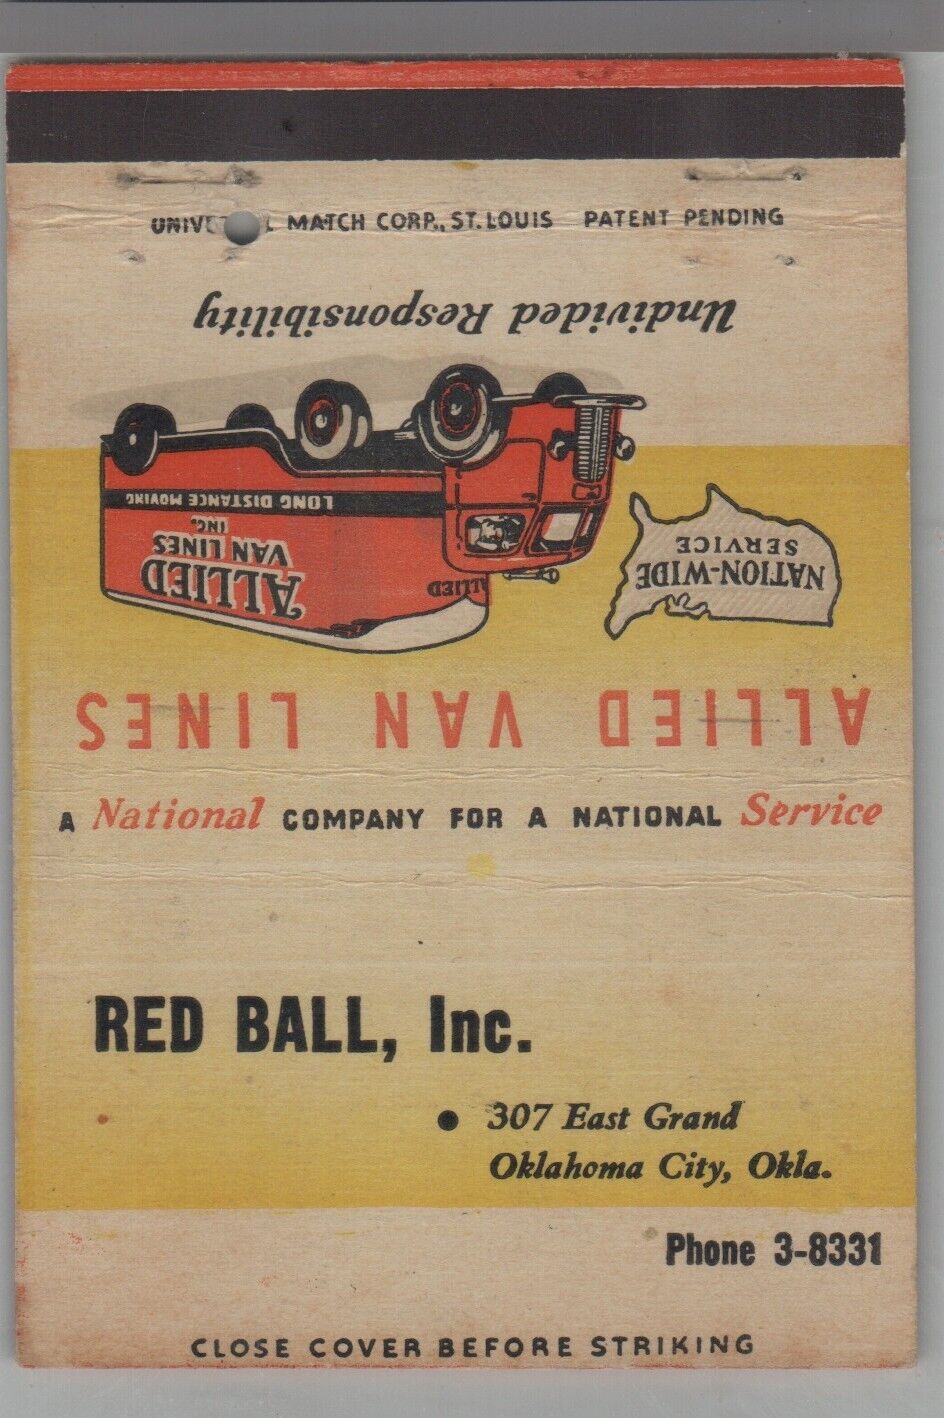 Matchbook Cover Allied Van Lines Red Ball, Inc. Oklahoma City, OK